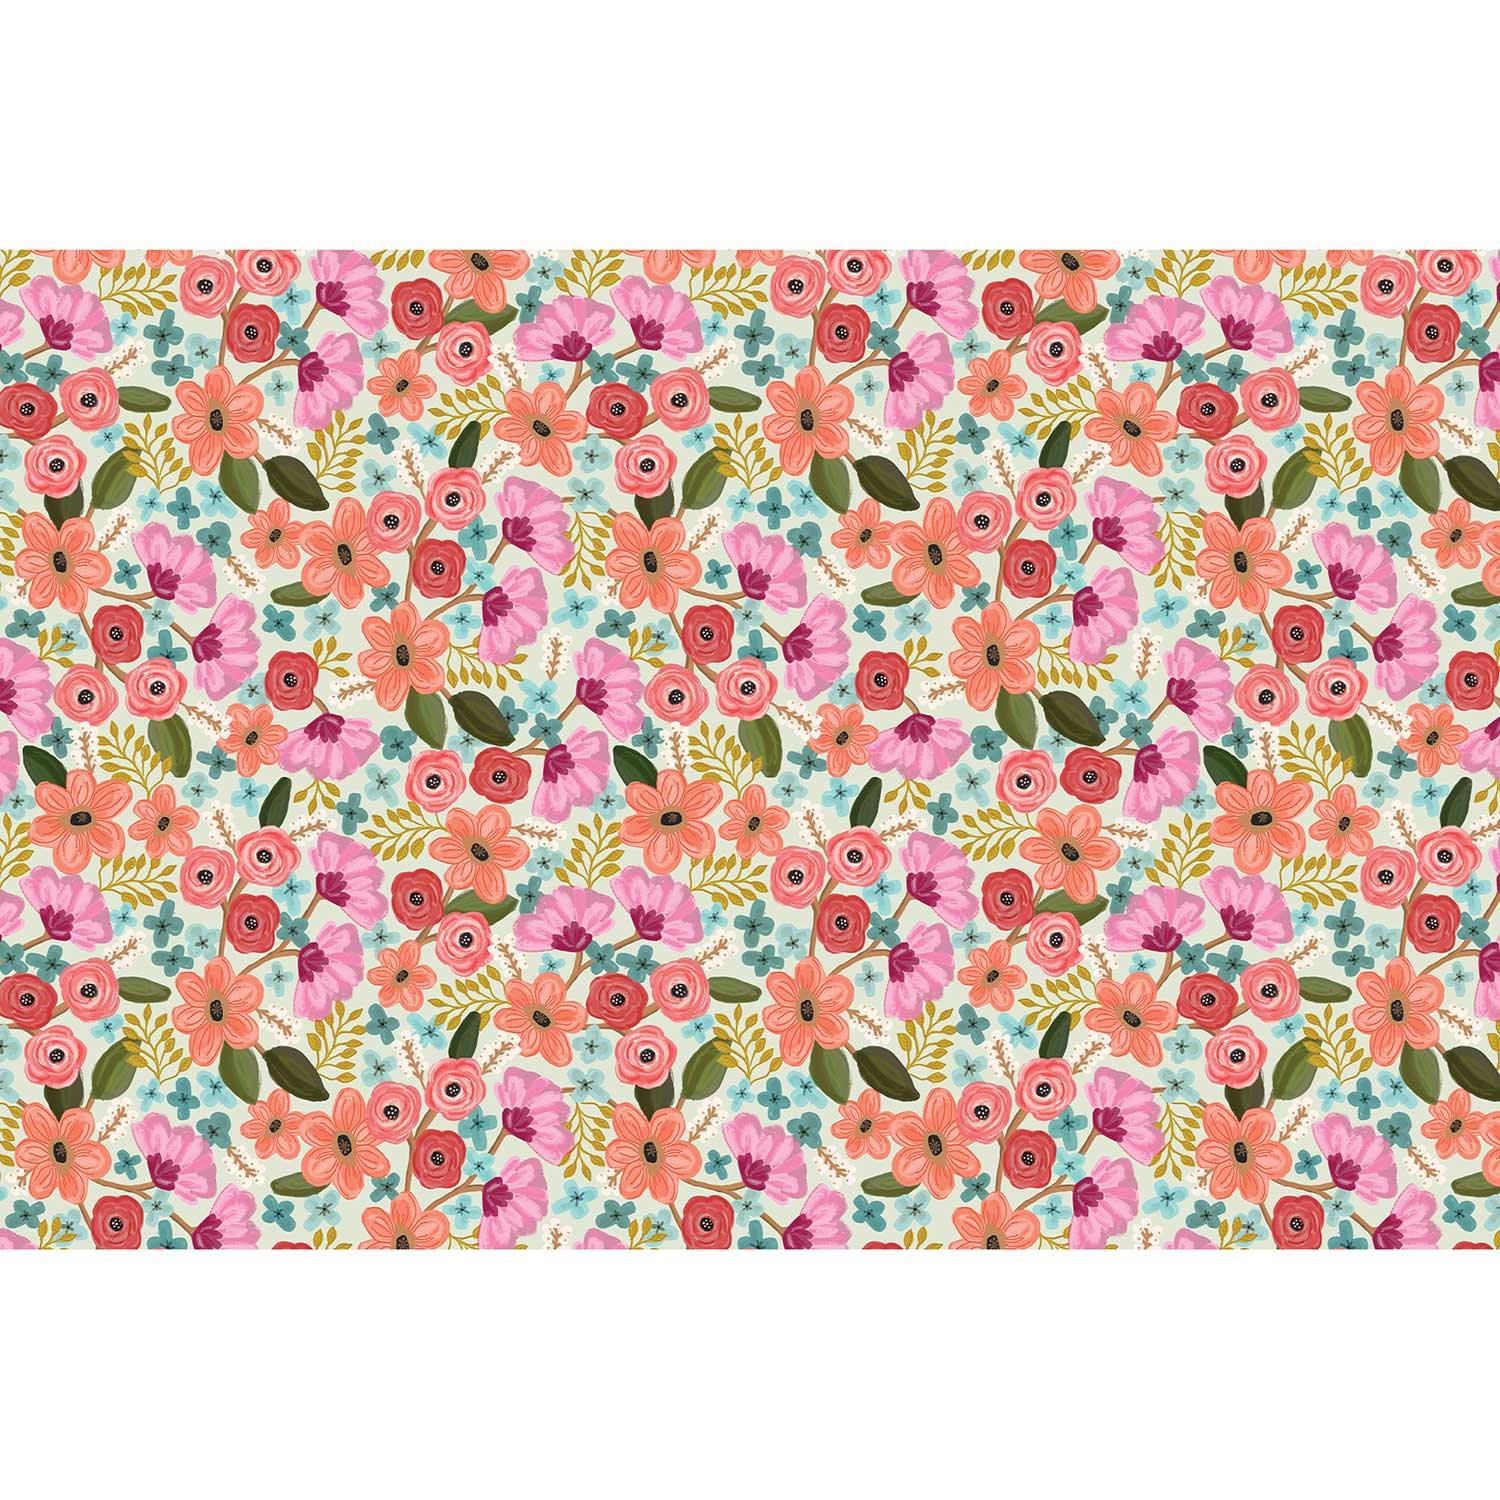 Gypsy Floral 20" x 30" Floral Gift Tissue Paper by Present Paper - Vysn